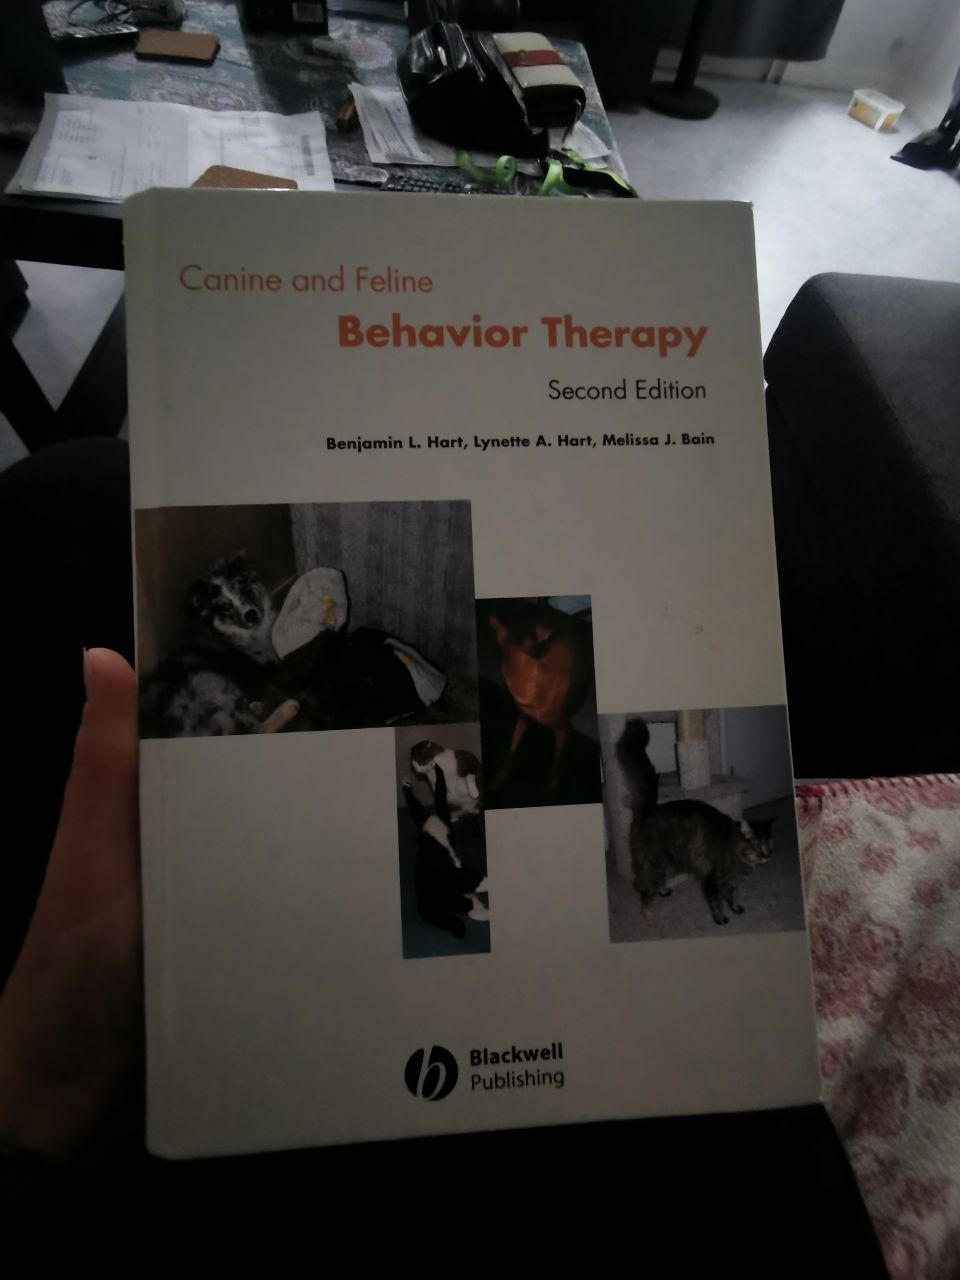 Canine and Feline Behavior Therapy 2nd Edition